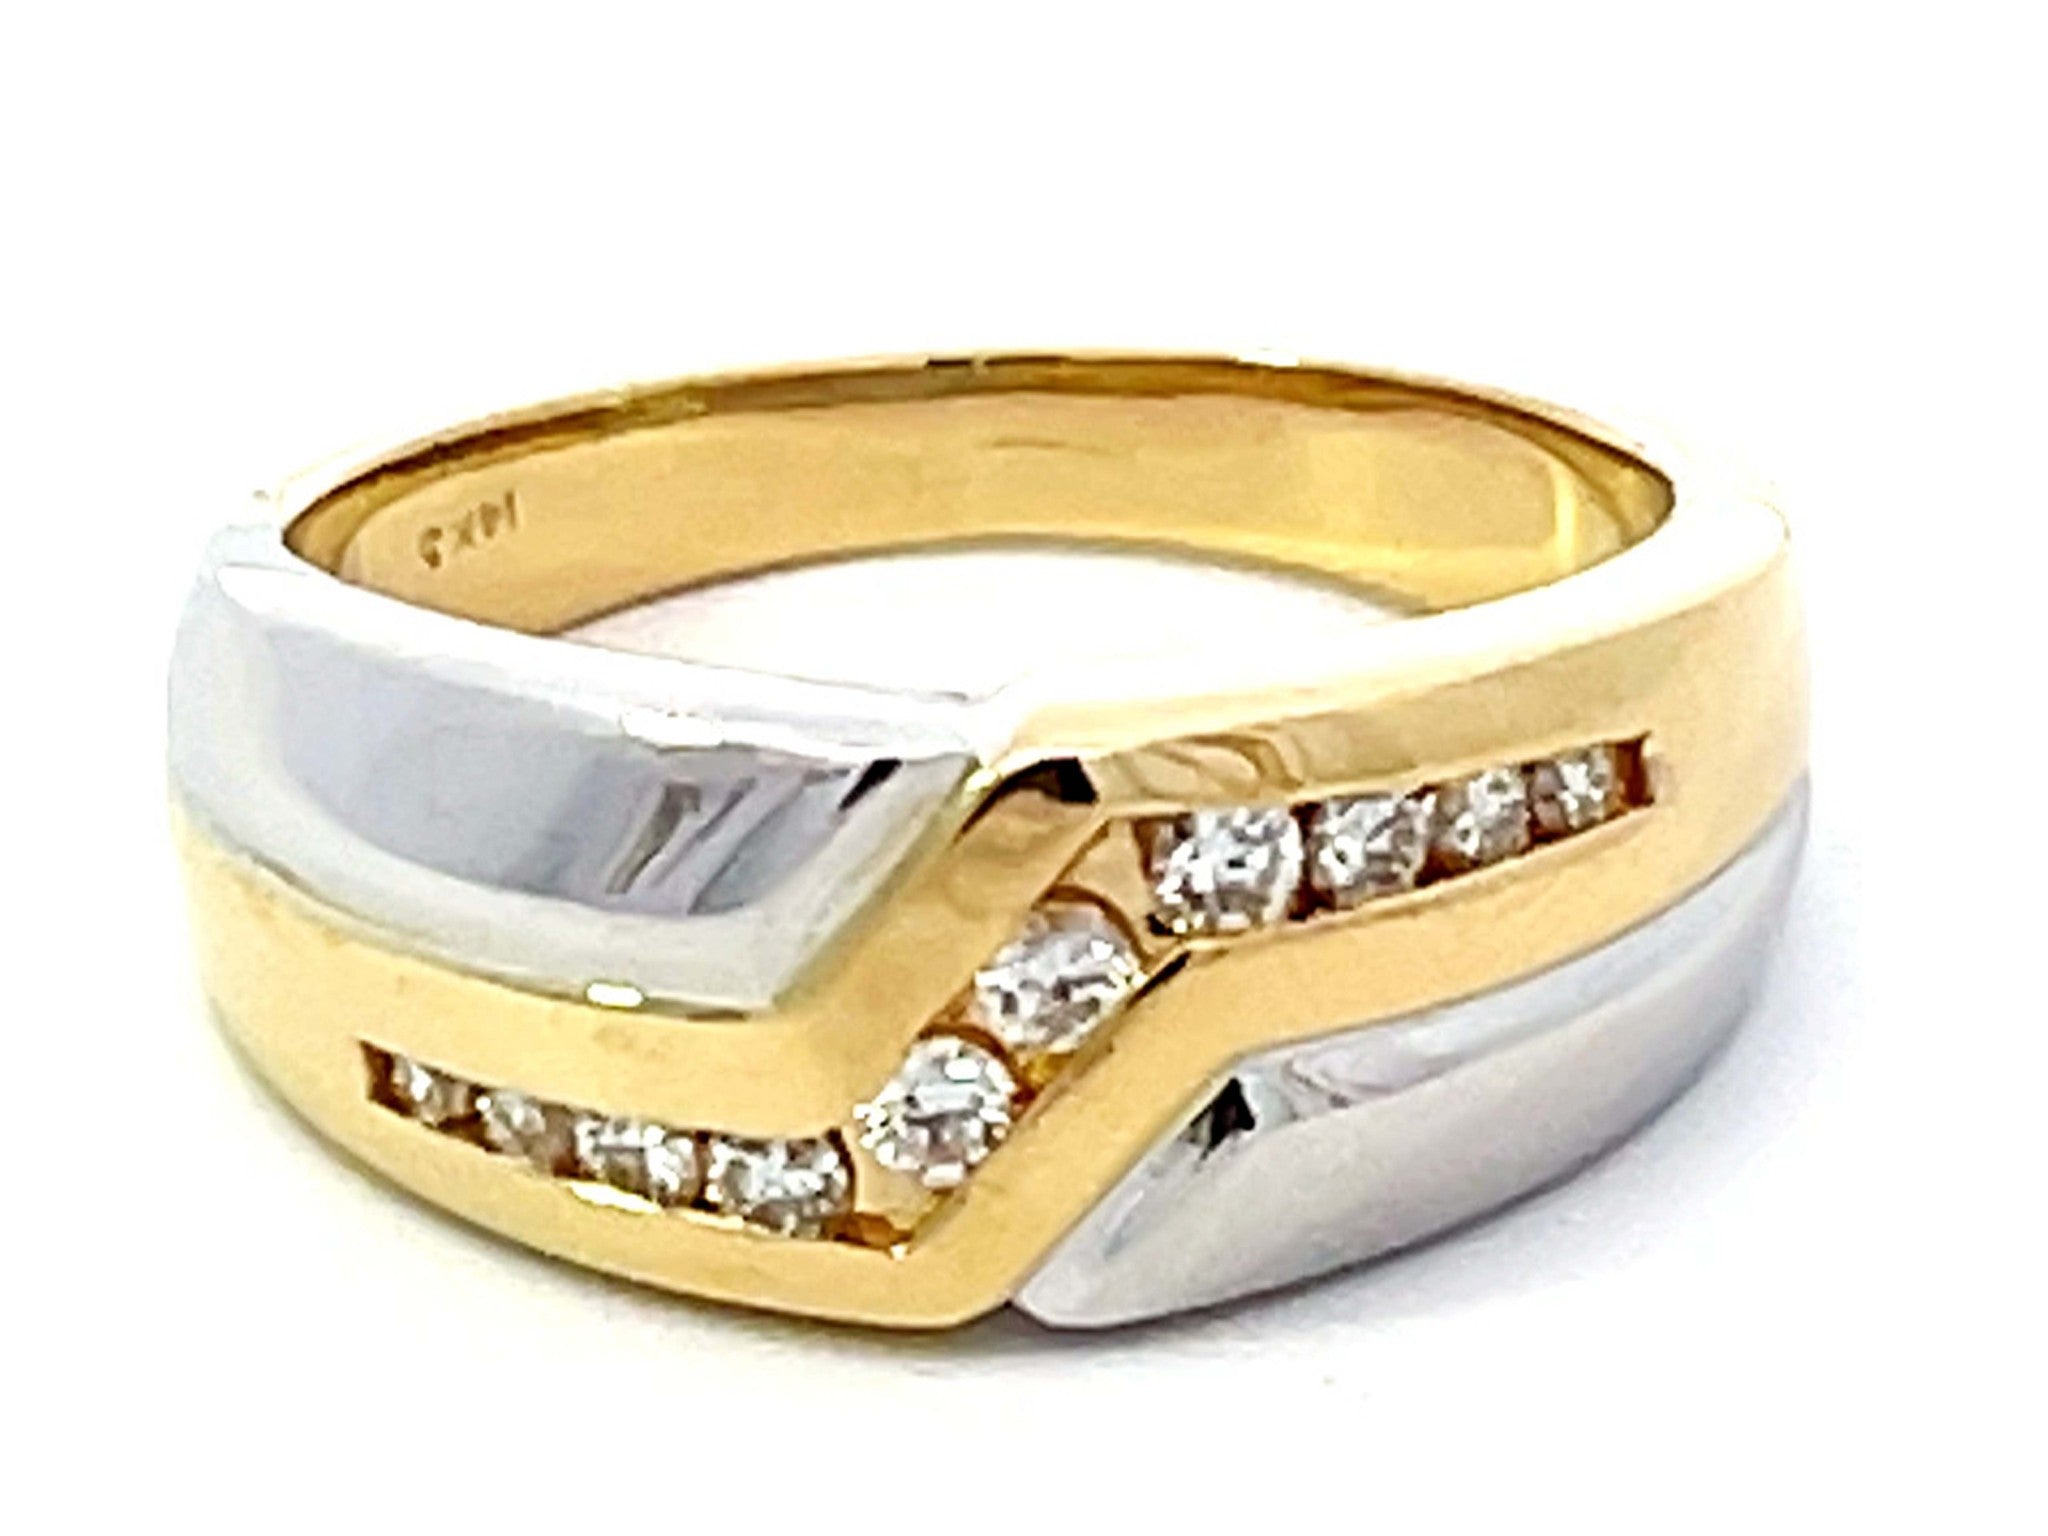 Two Toned Gold Mens Ring with Diamonds 14K Yellow Gold